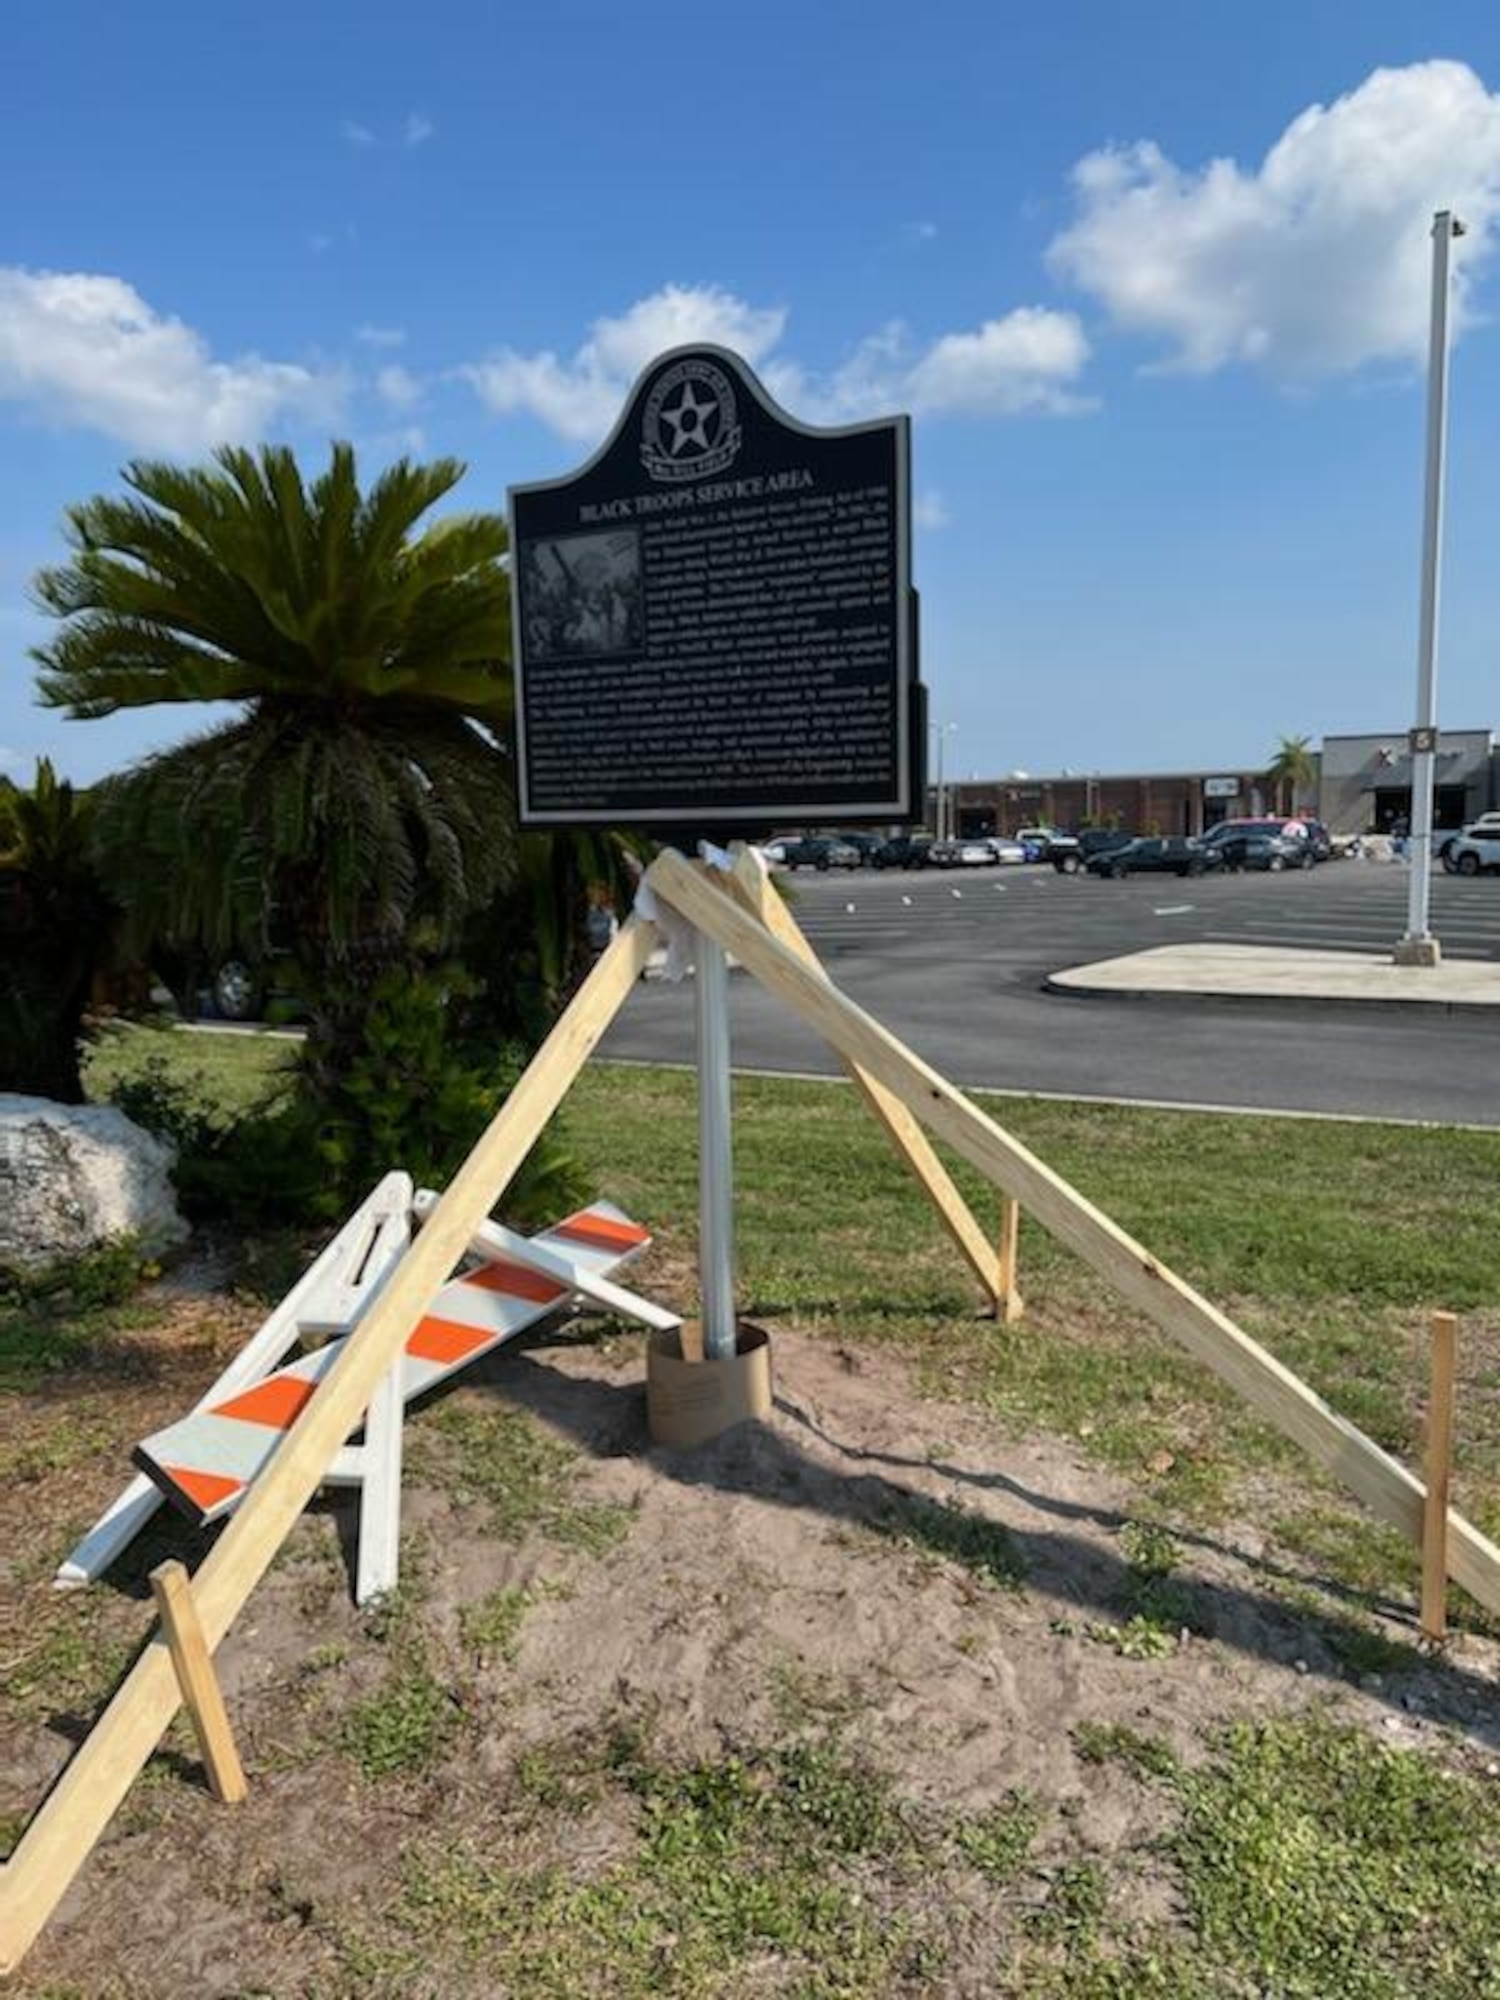 The 6th Civil Engineer Squadron prepares the site of the final marker near the once segregated facilities of the Aviation Engineers outside the MacDill Air Force Base Exchange Mall at MacDill AFB, Florida, June 26, 2022. The heritage marker formally recognizes the service of thousands of African Americans who served in engineer aviation battalions during World War II. The efforts of these battalions that trained at MacDill, expedited the end of the conflict and helped ensure an Allied victory. (U.S. Air Force photo by Master Sgt. Rickey Gray)